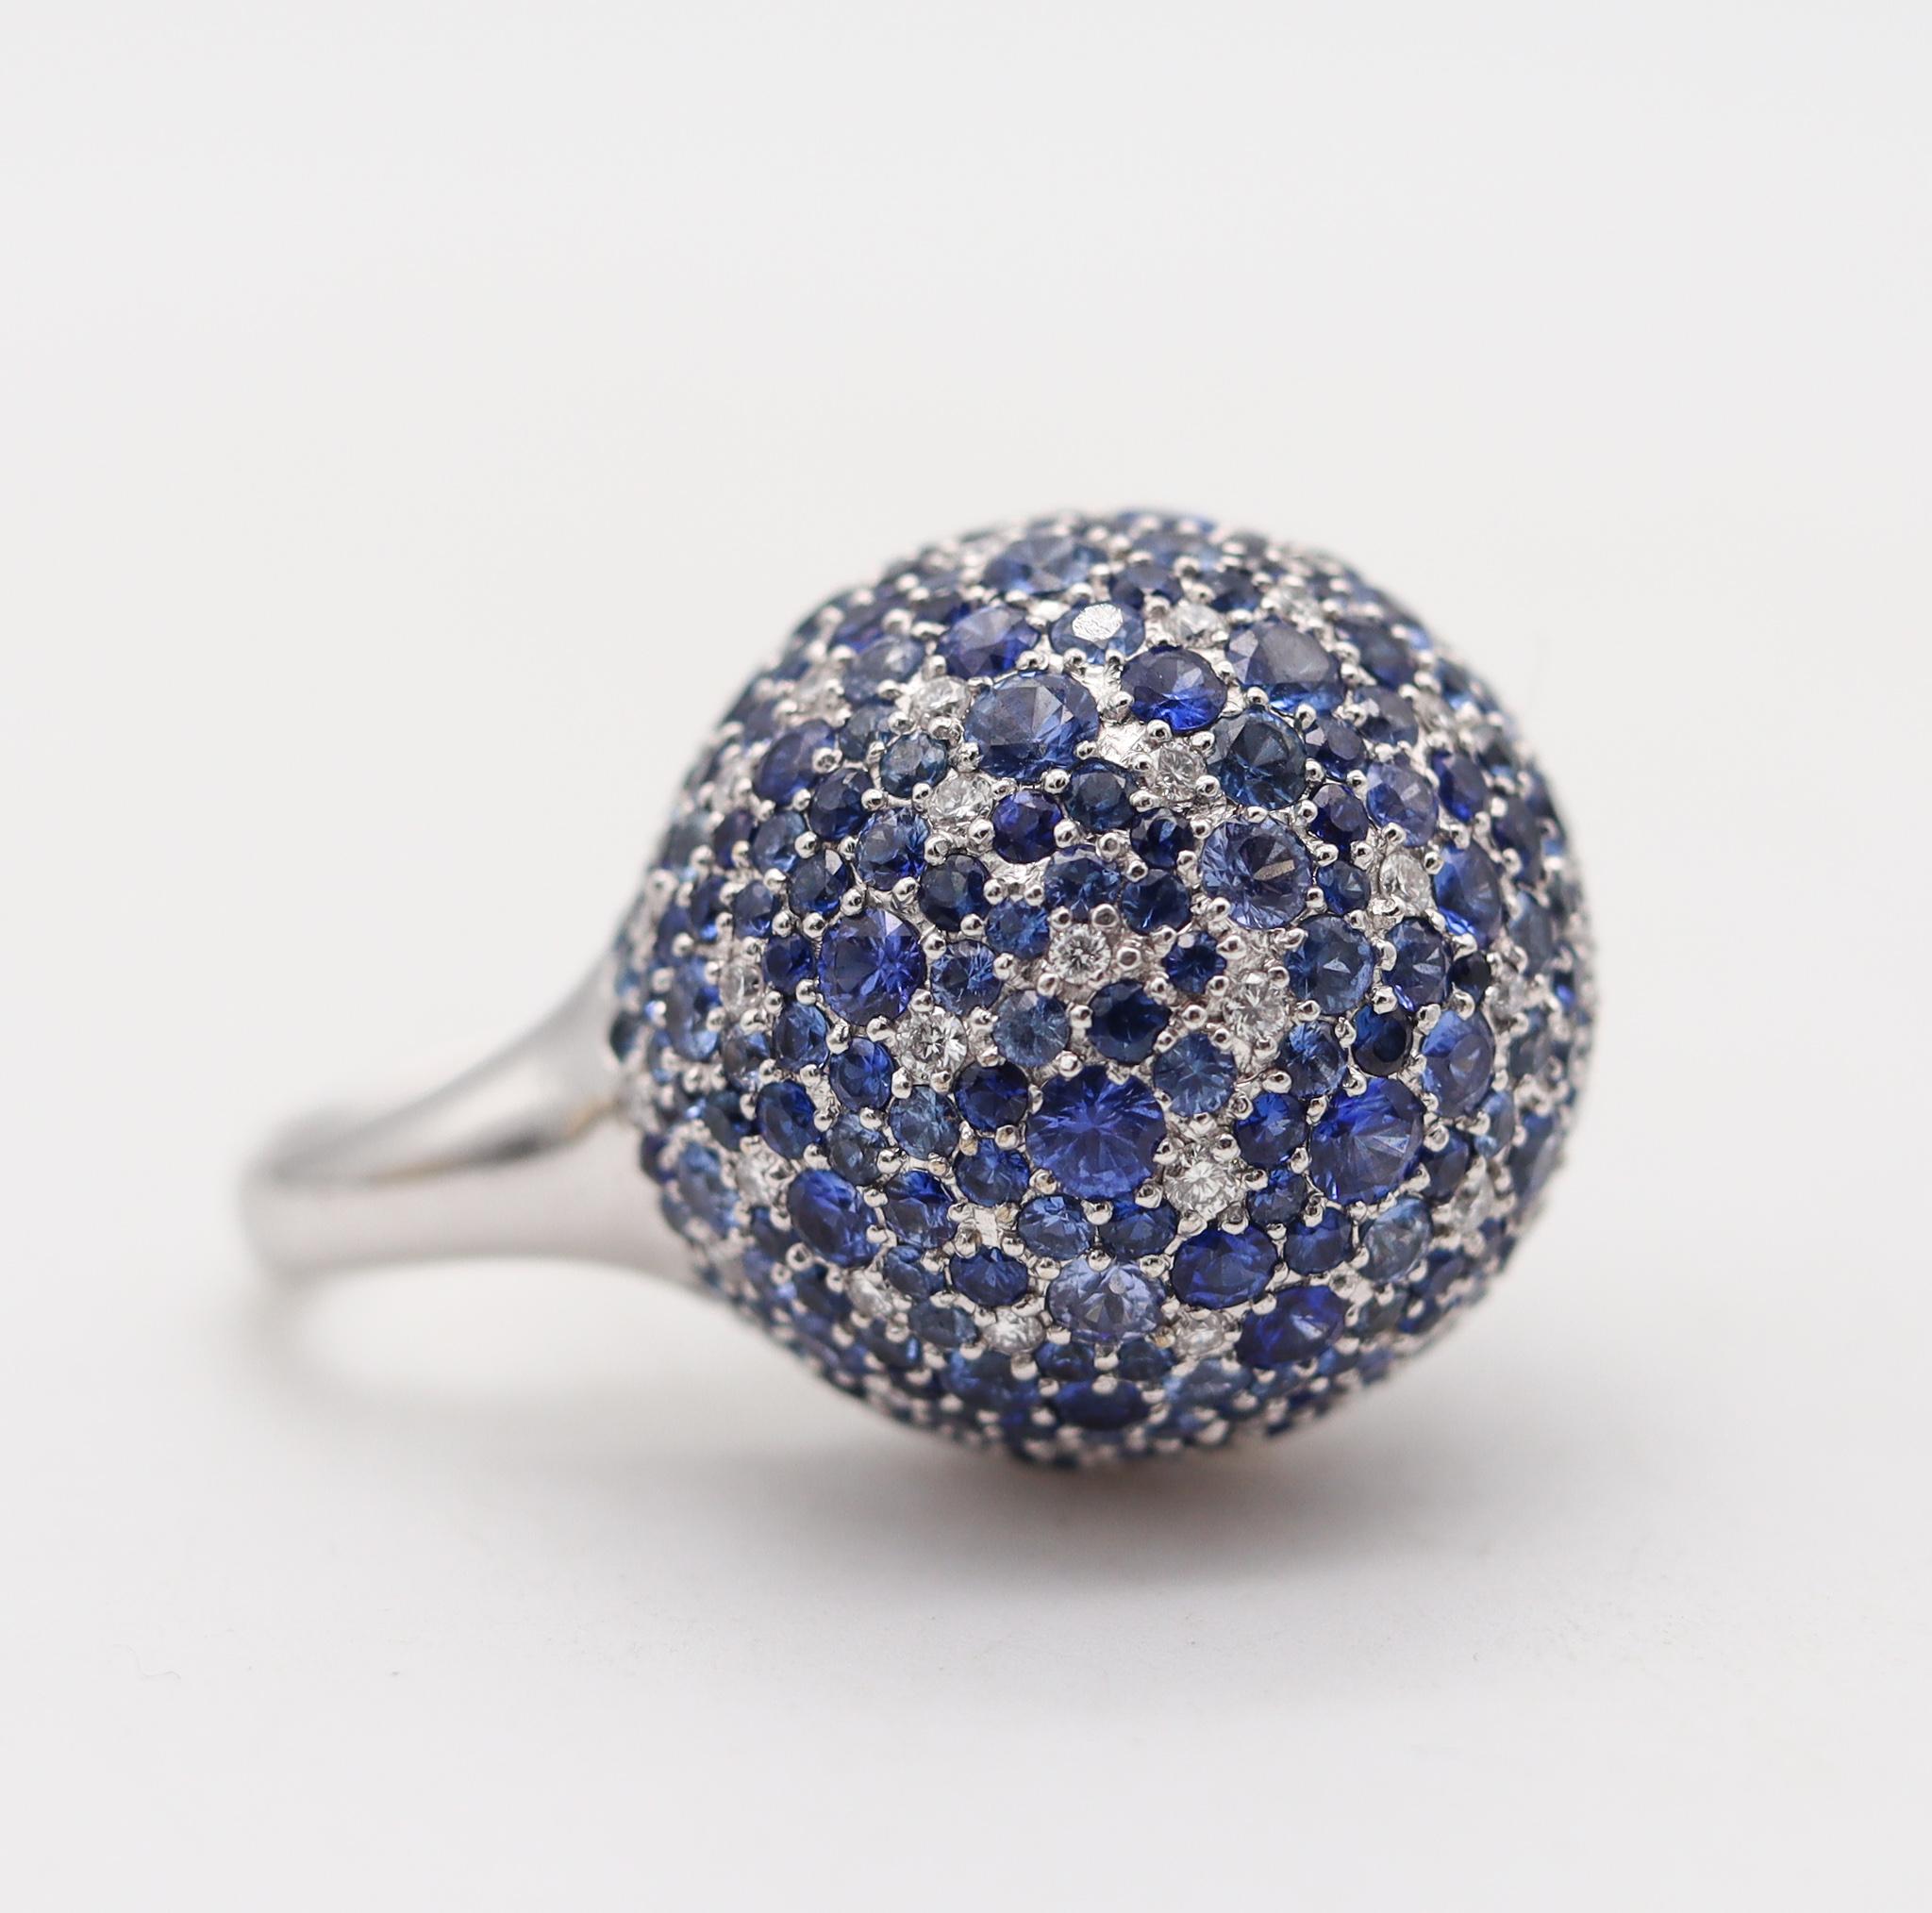 Brilliant Cut Contemporary Sphere Cocktail Ring 18Kt Gold with 11.87 Ctw Diamonds & Sapphires